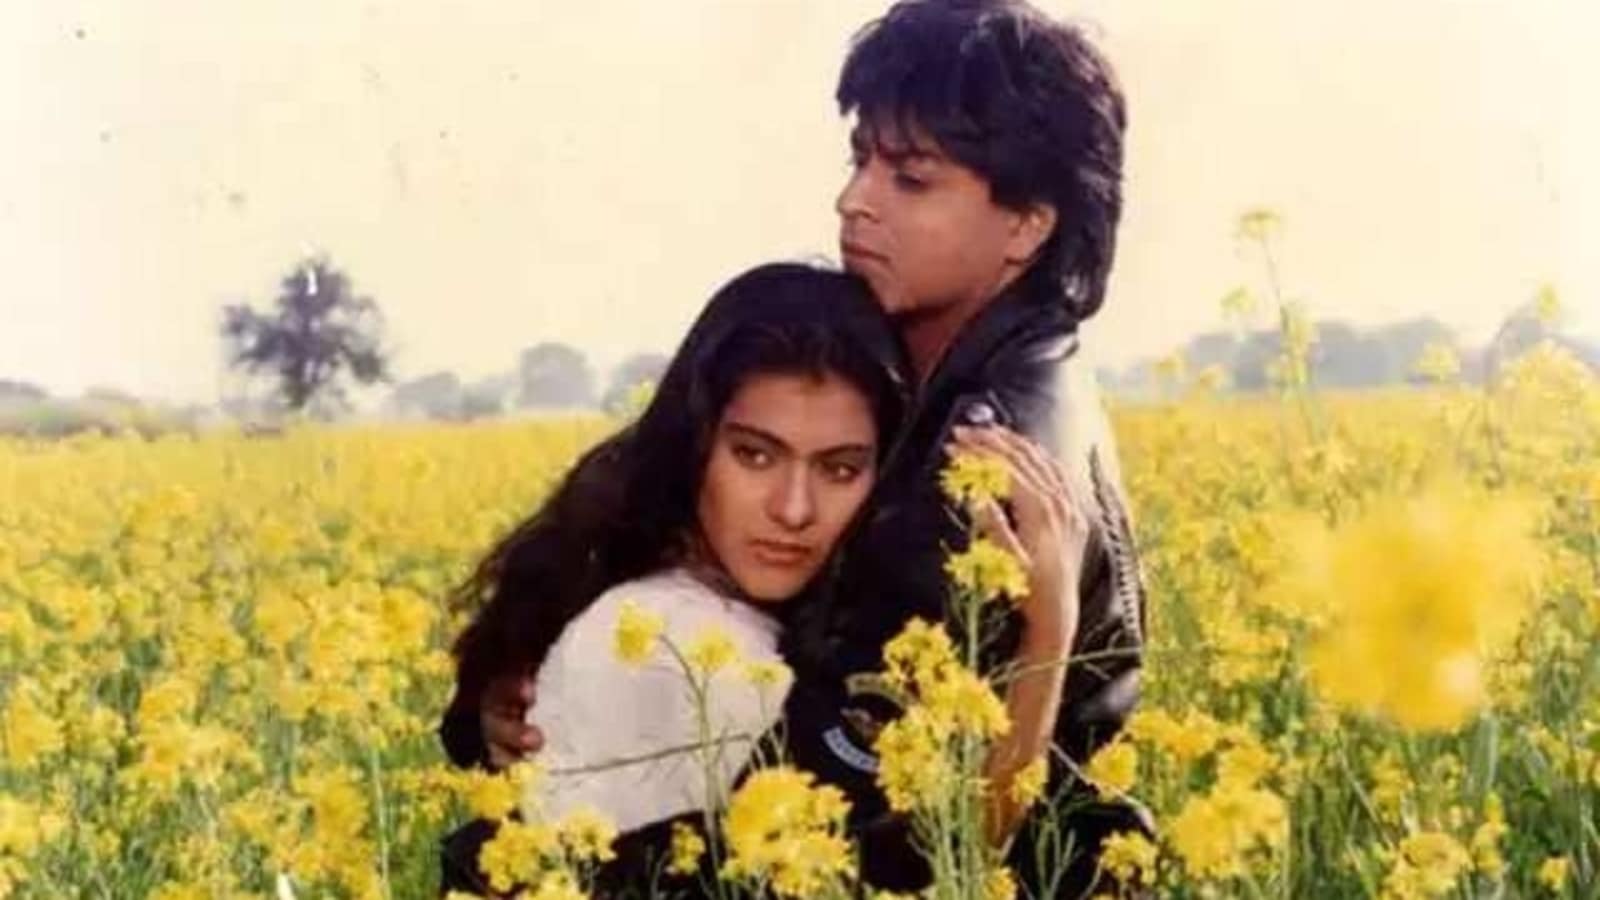 Shah Rukh Khan: From DDLJ to Dilwale! | TheHealthSite.com